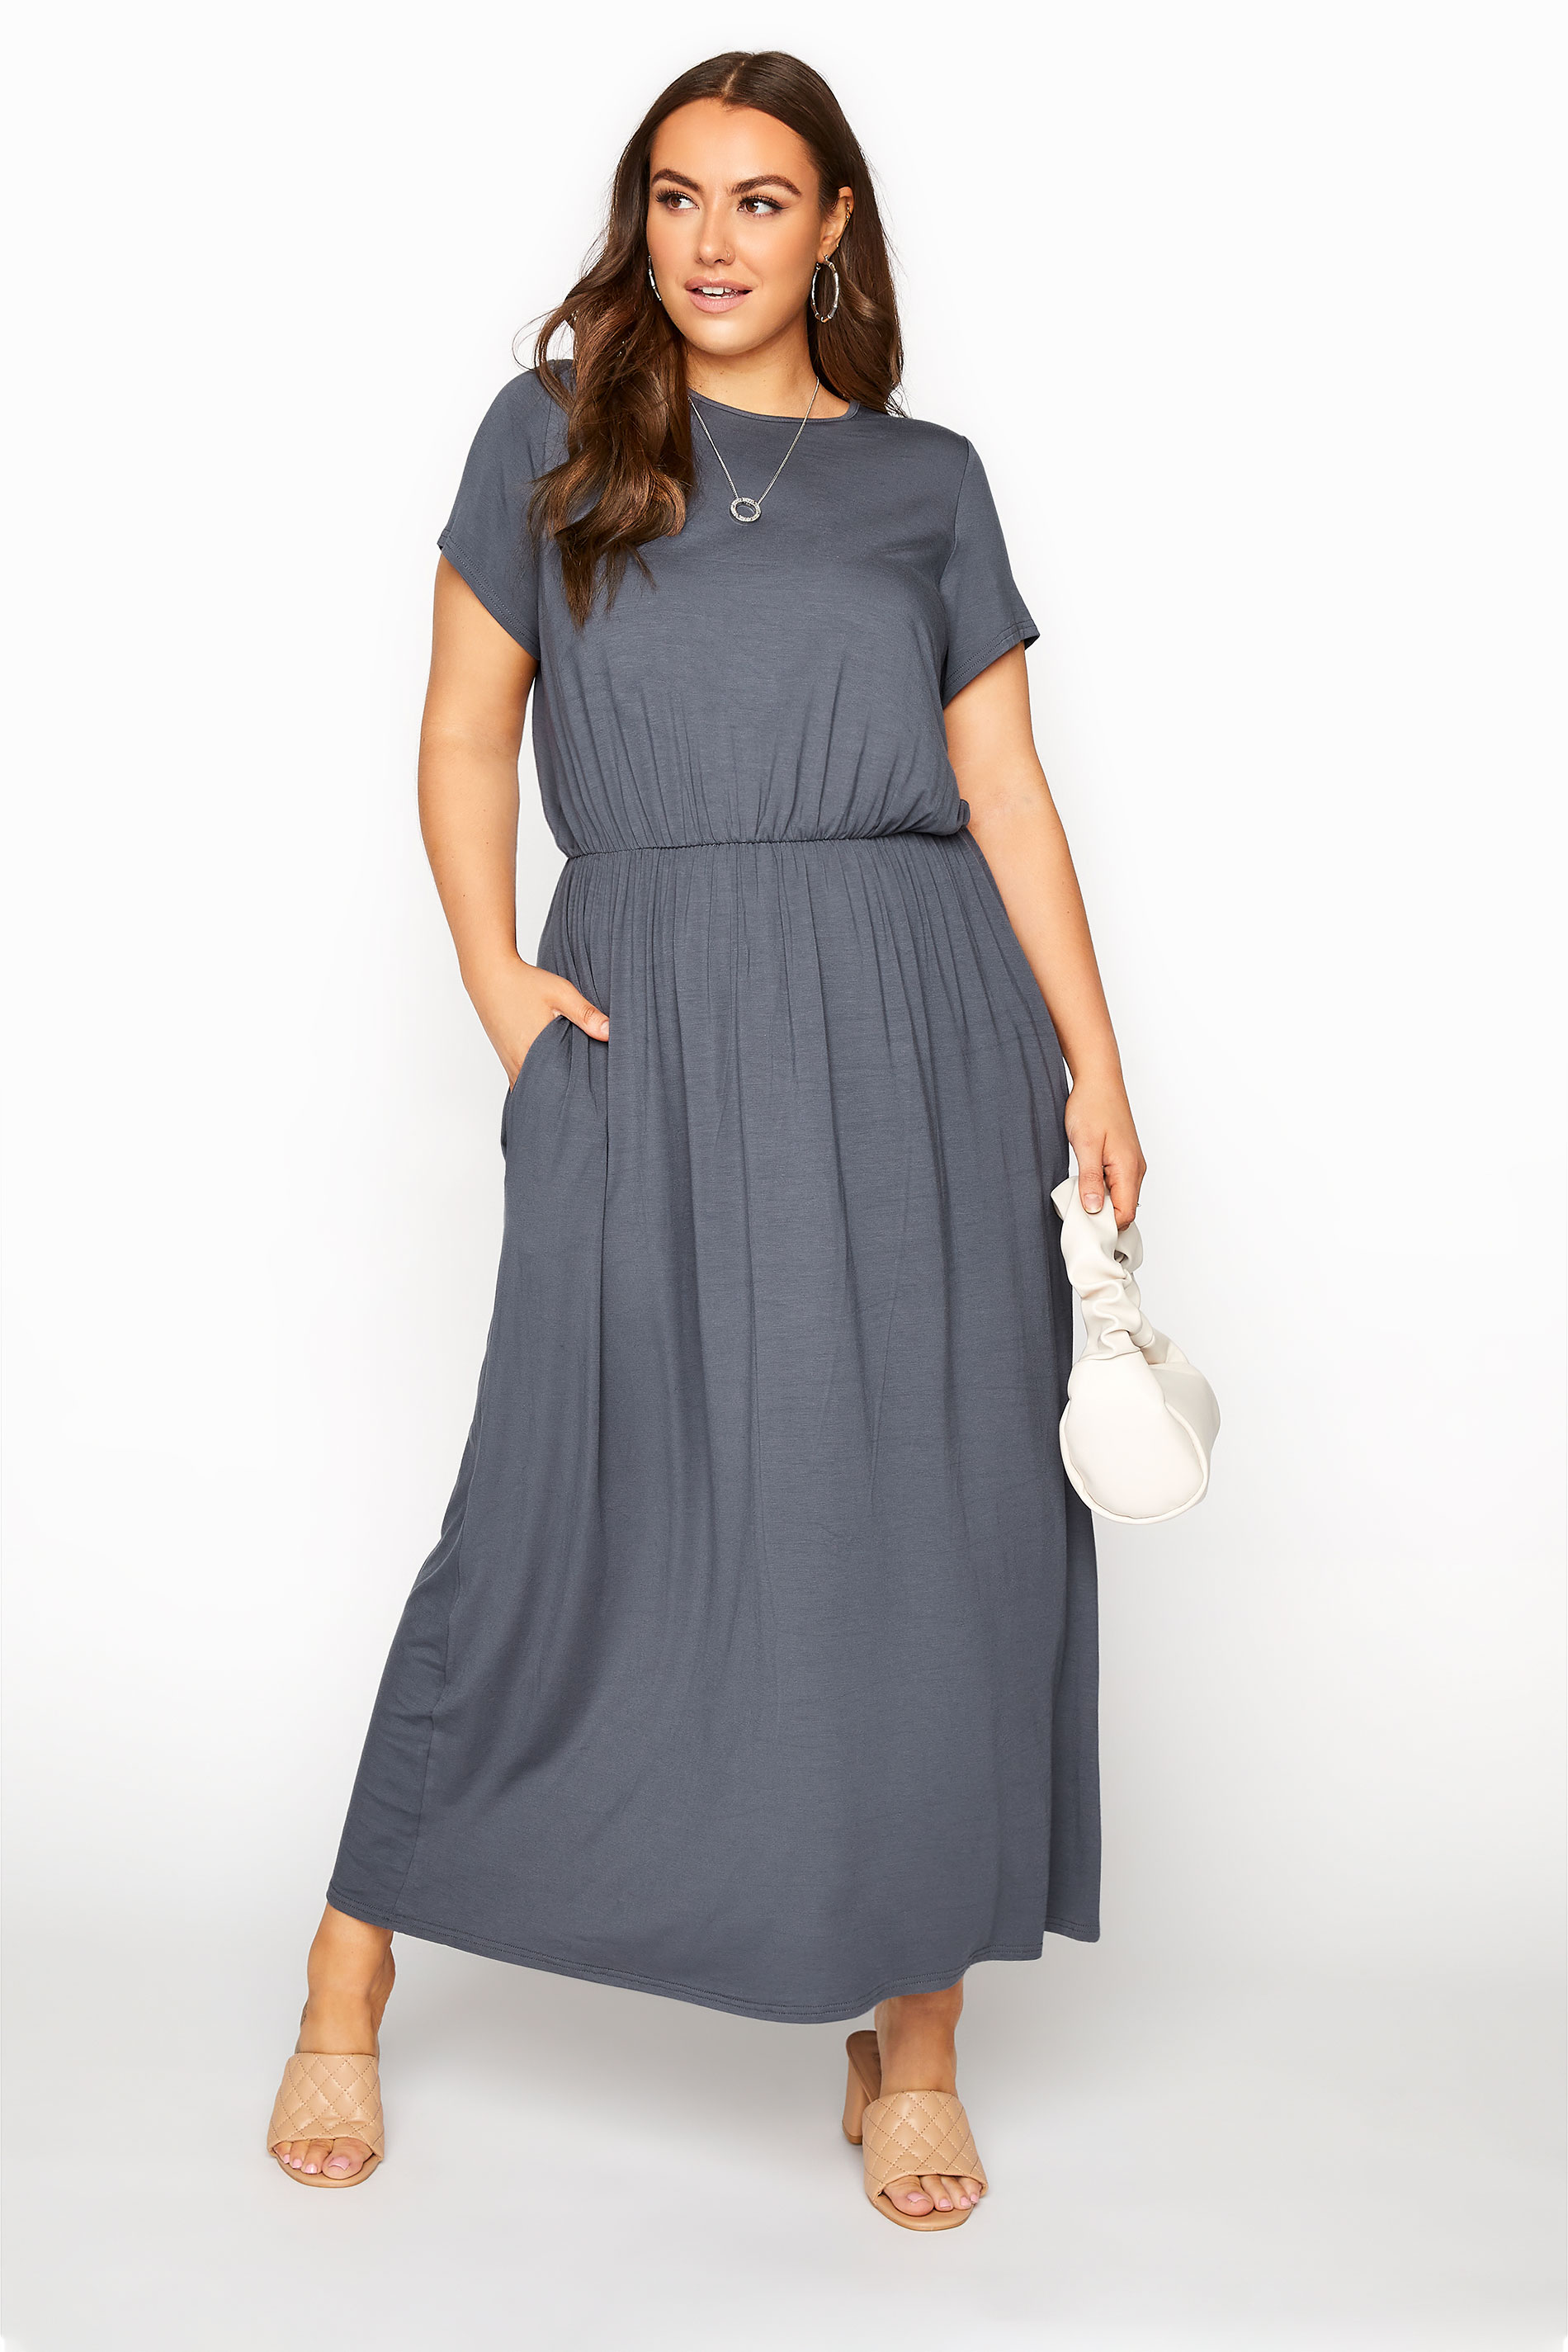 YOURS LONDON Grey Pocket Maxi Dress | Yours Clothing